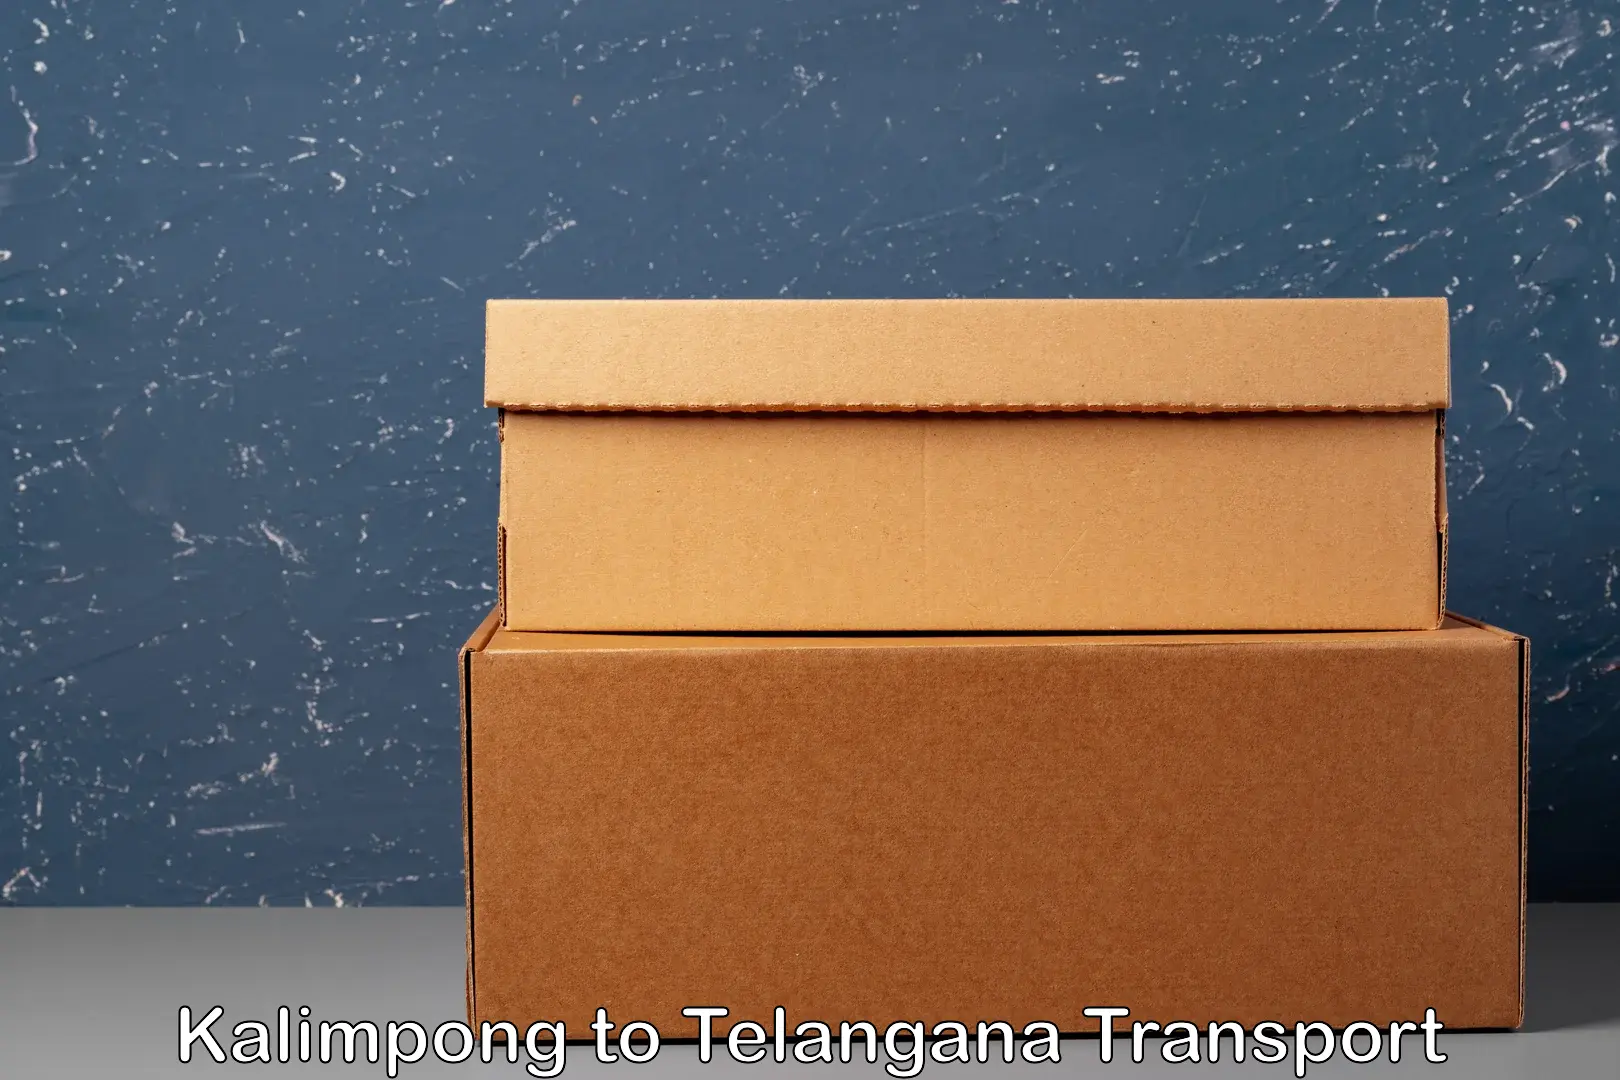 Truck transport companies in India Kalimpong to Tallada